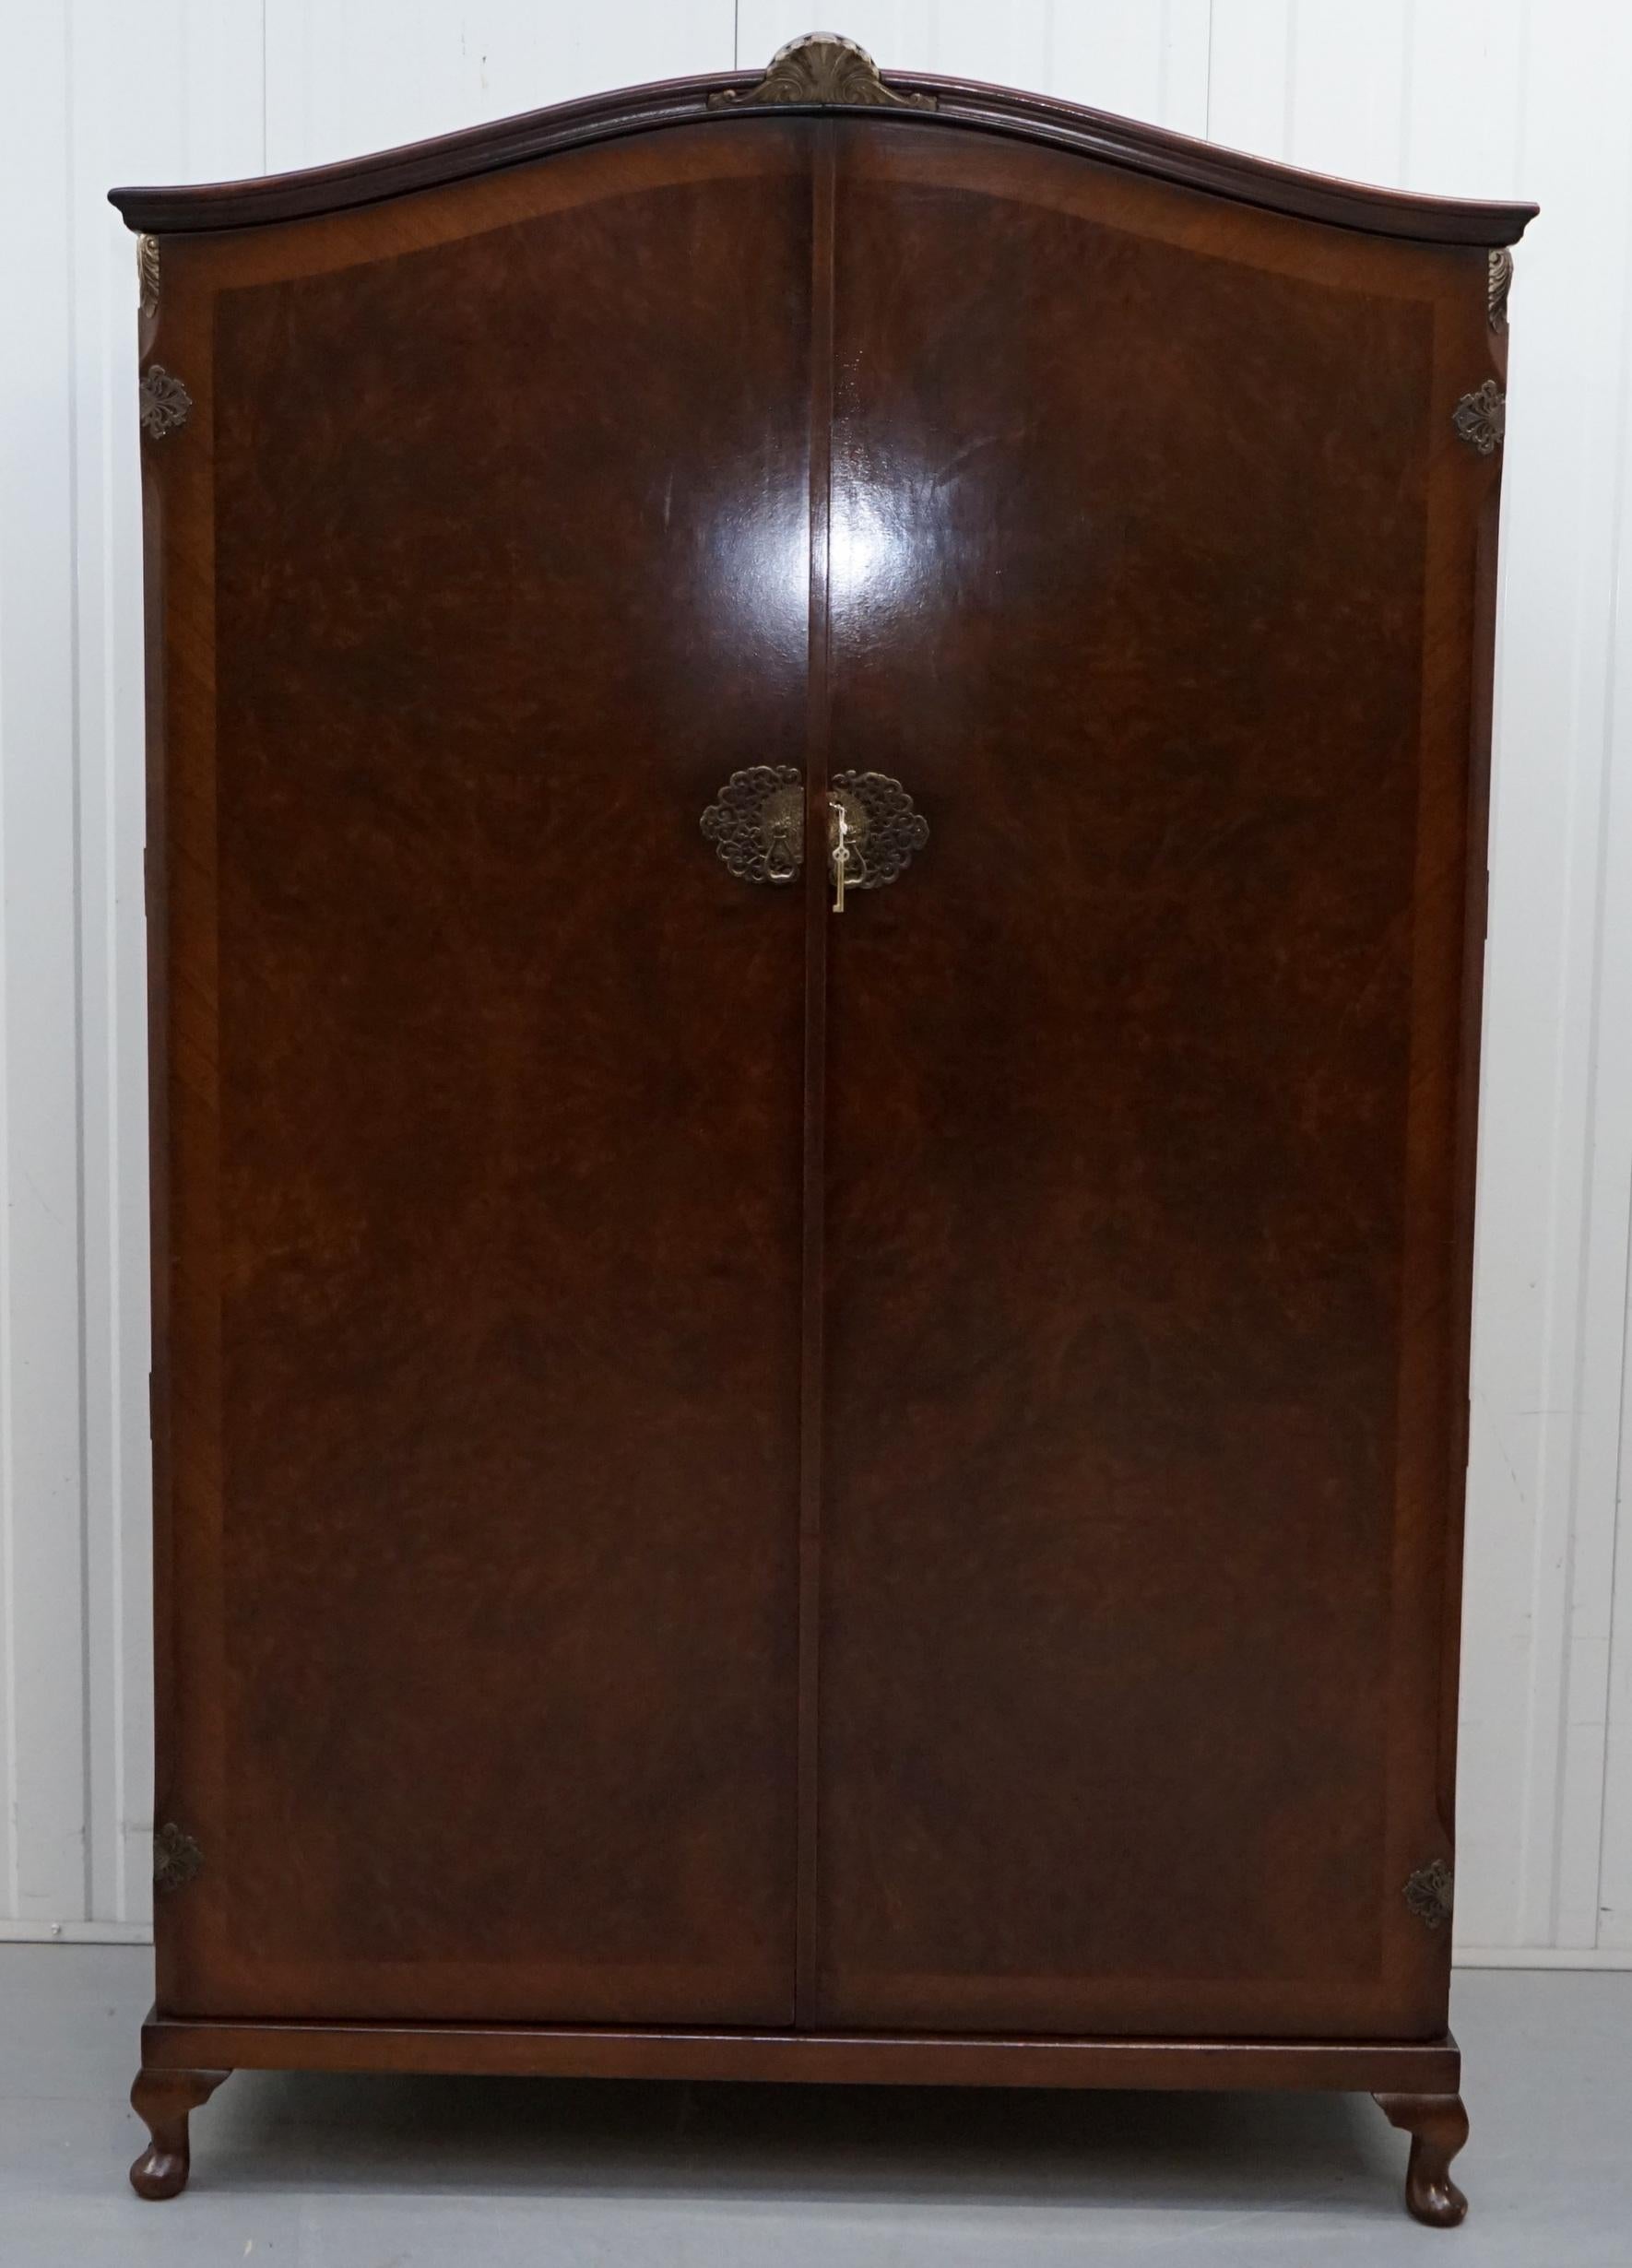 We are delighted to offer for sale this lovely Burr walnut large double bank wardrobe part of a suite

This wardrobe is very large and offers lots of storage space, we had the same one at home and my wife bought a small slim chest of drawers which